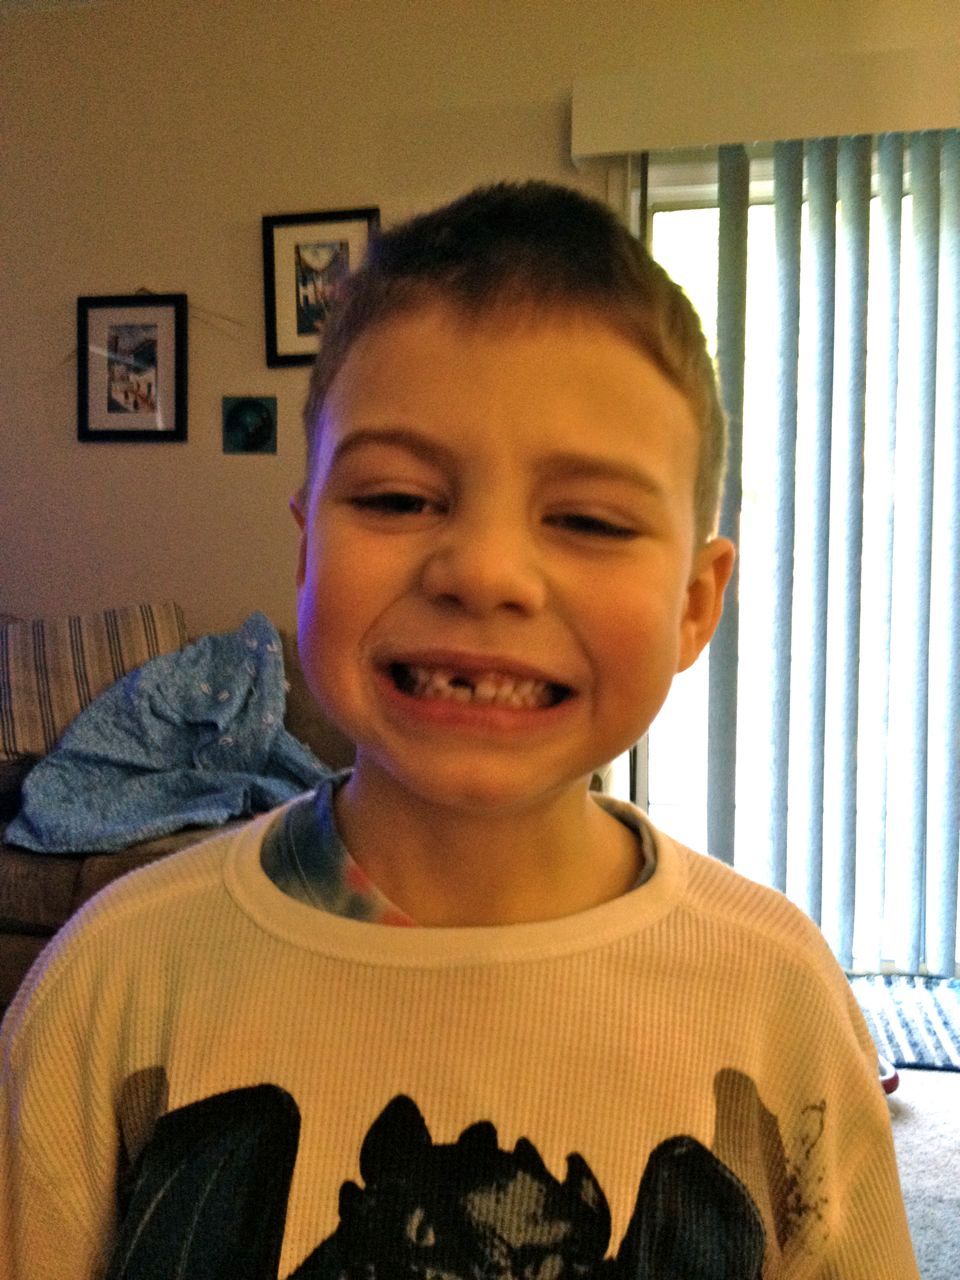 Another Lost Tooth